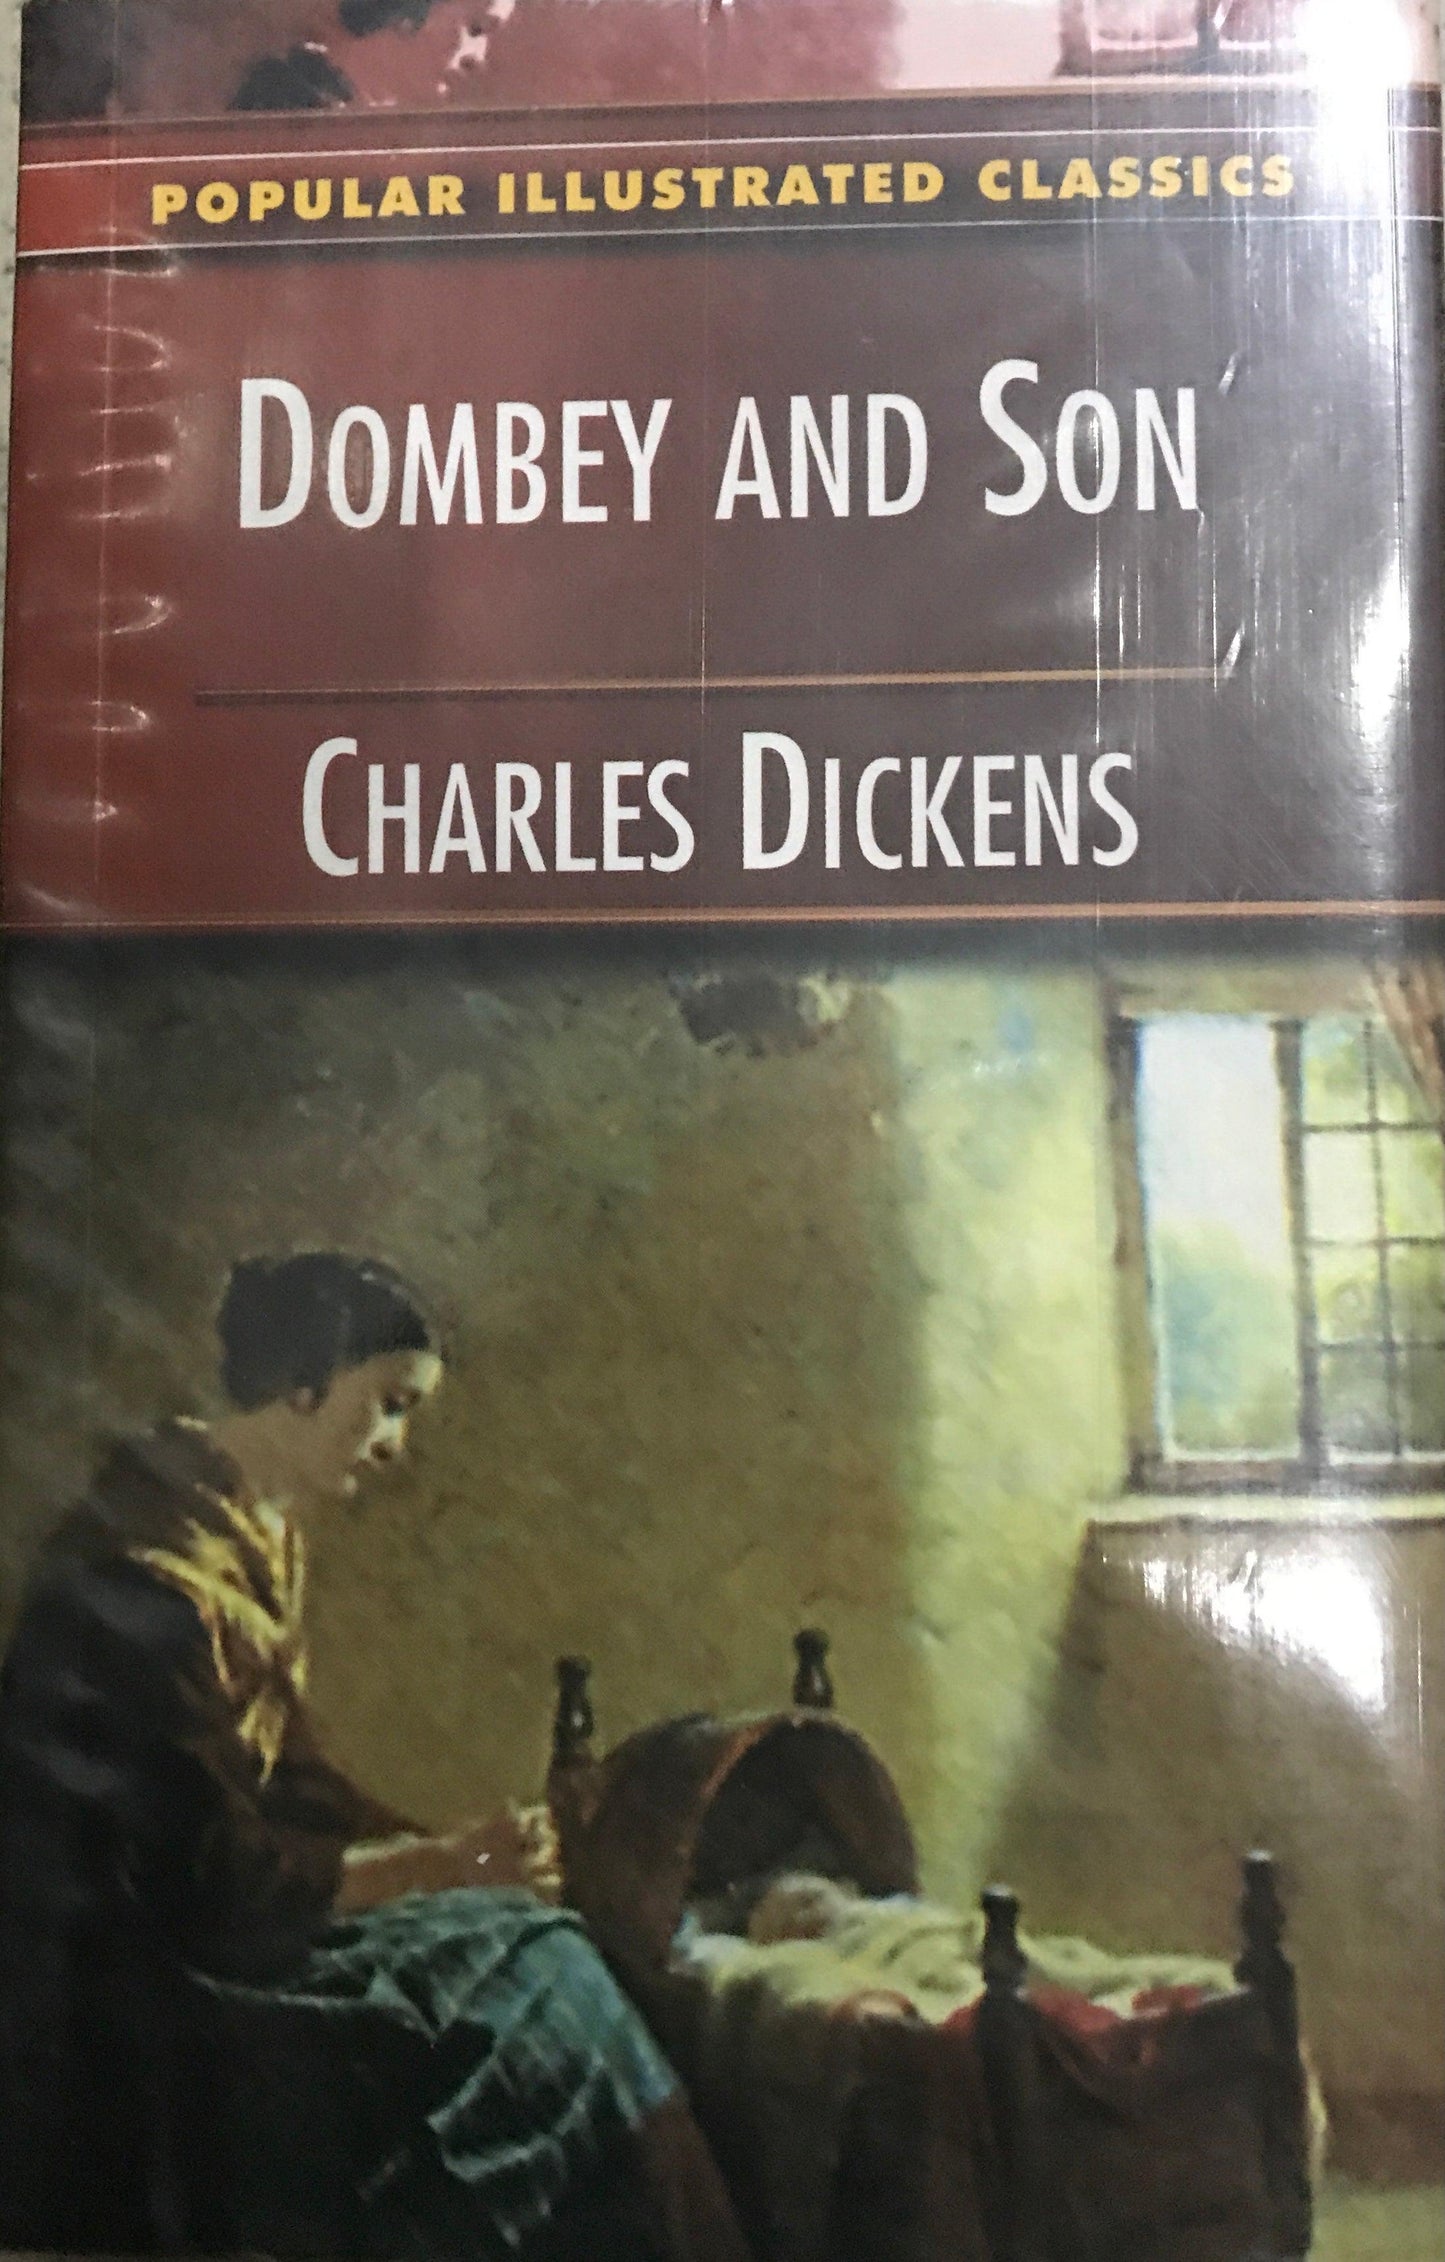 Dombey and Son - BIBLIONEPAL